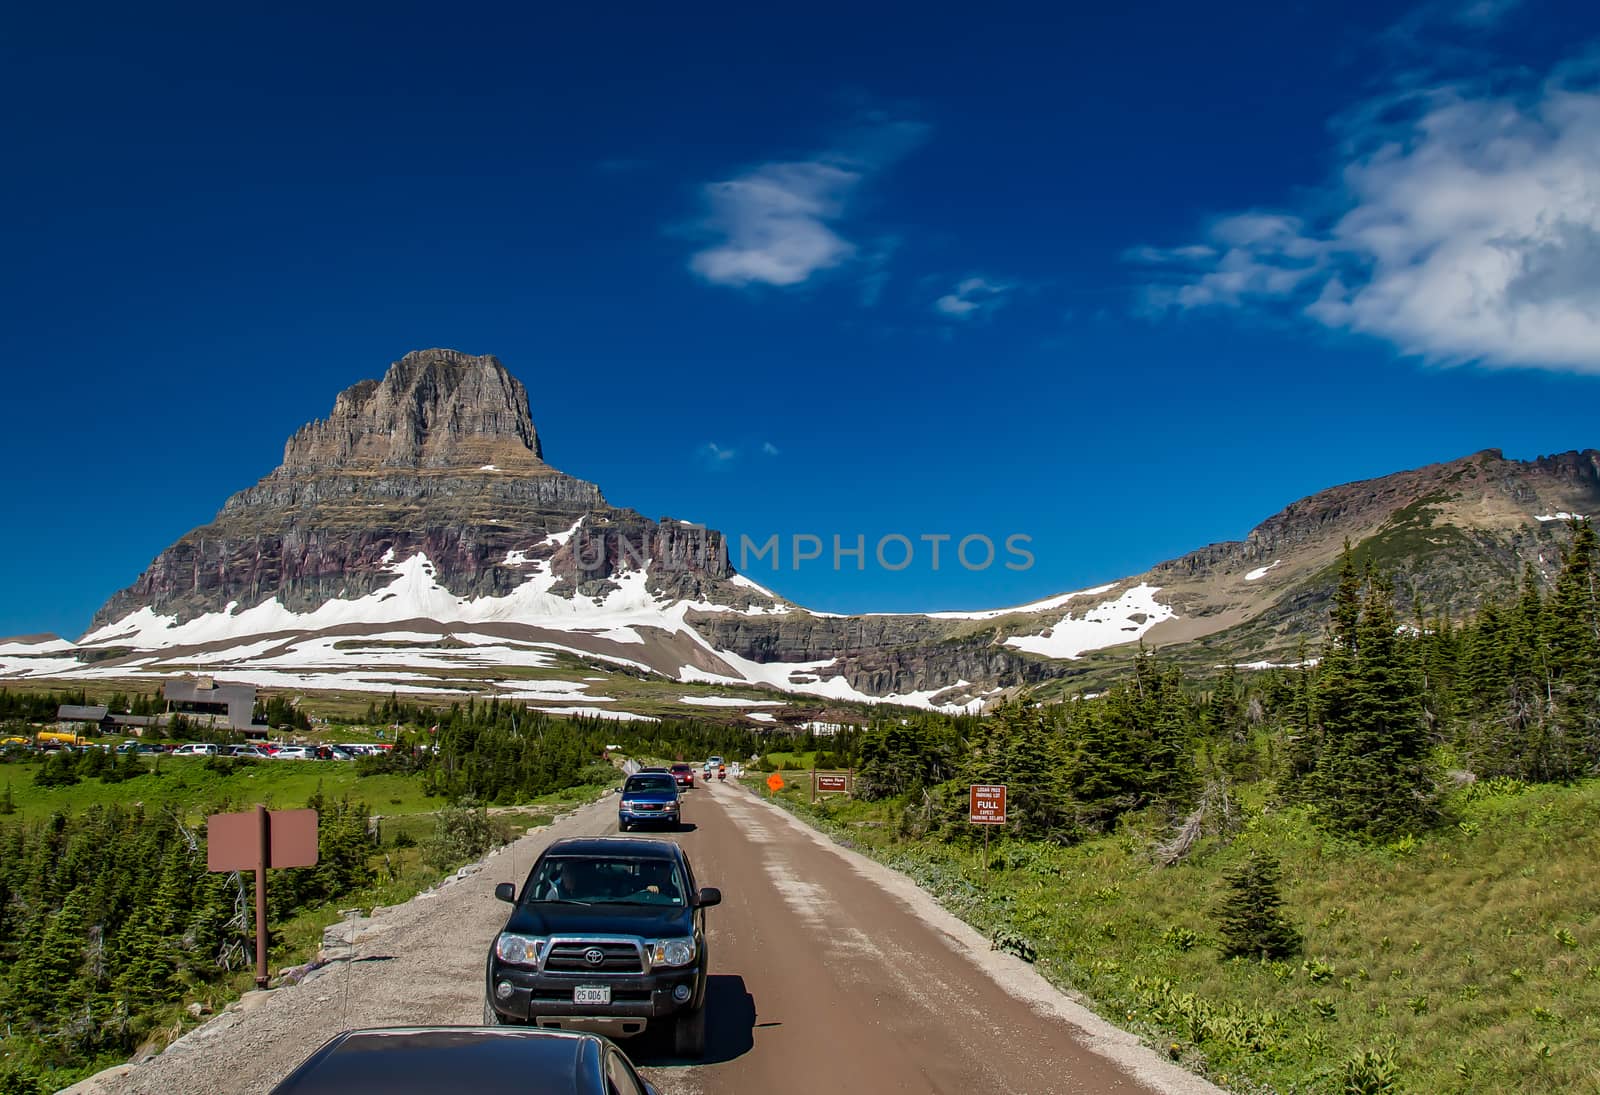 Traffic on Going to the Sun Road, Glacier National Park, Montana